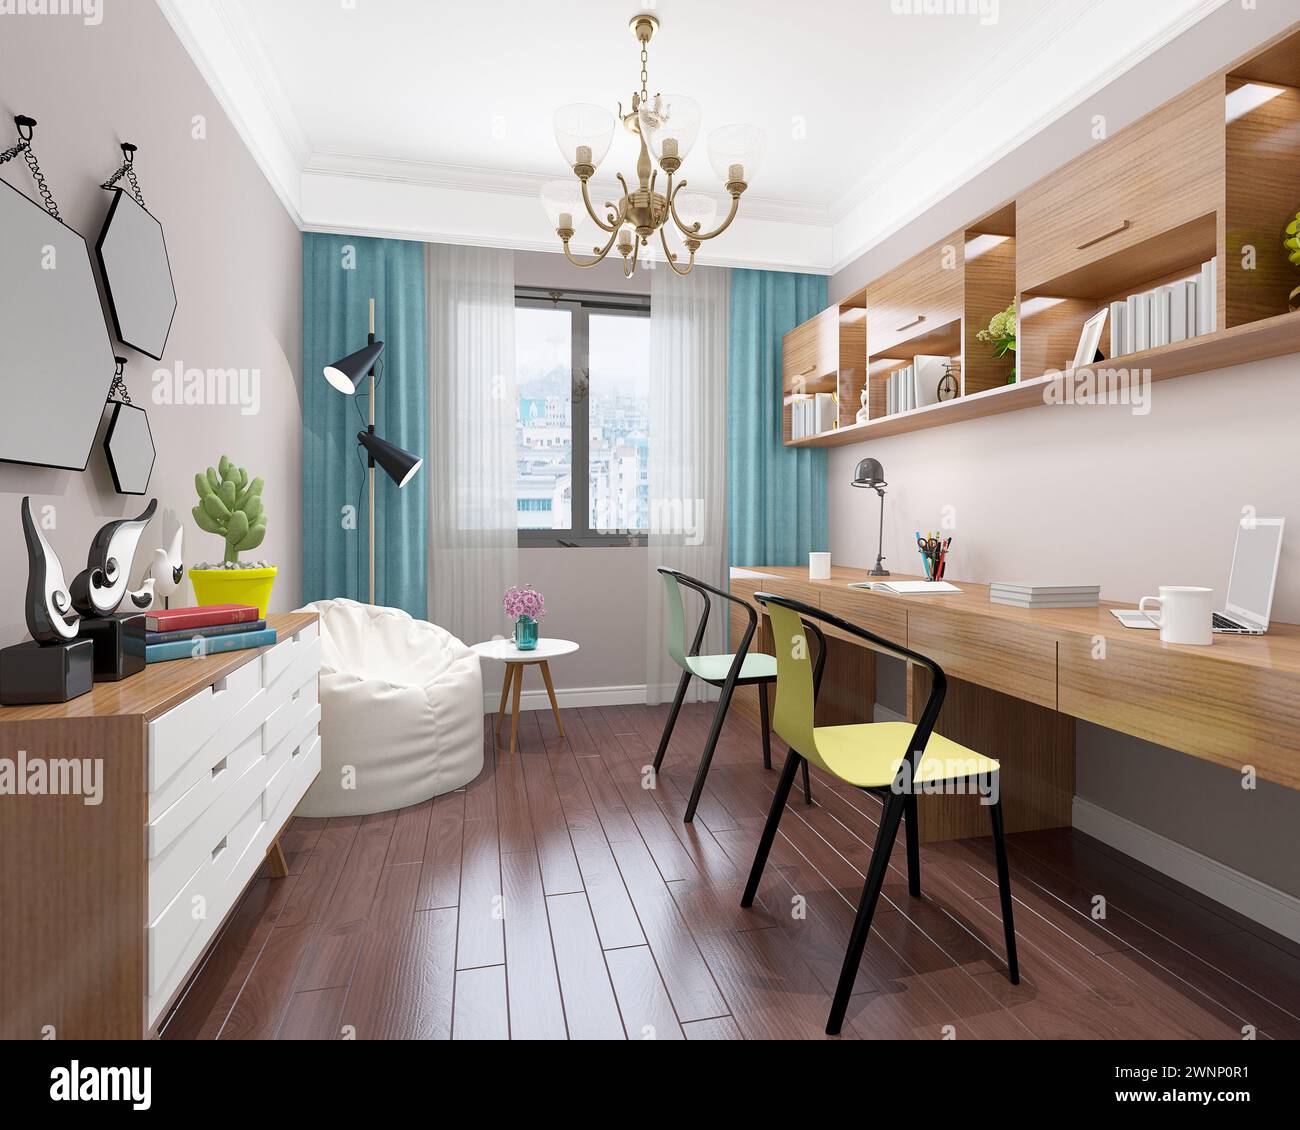 3d render of working office interior Stock Photo